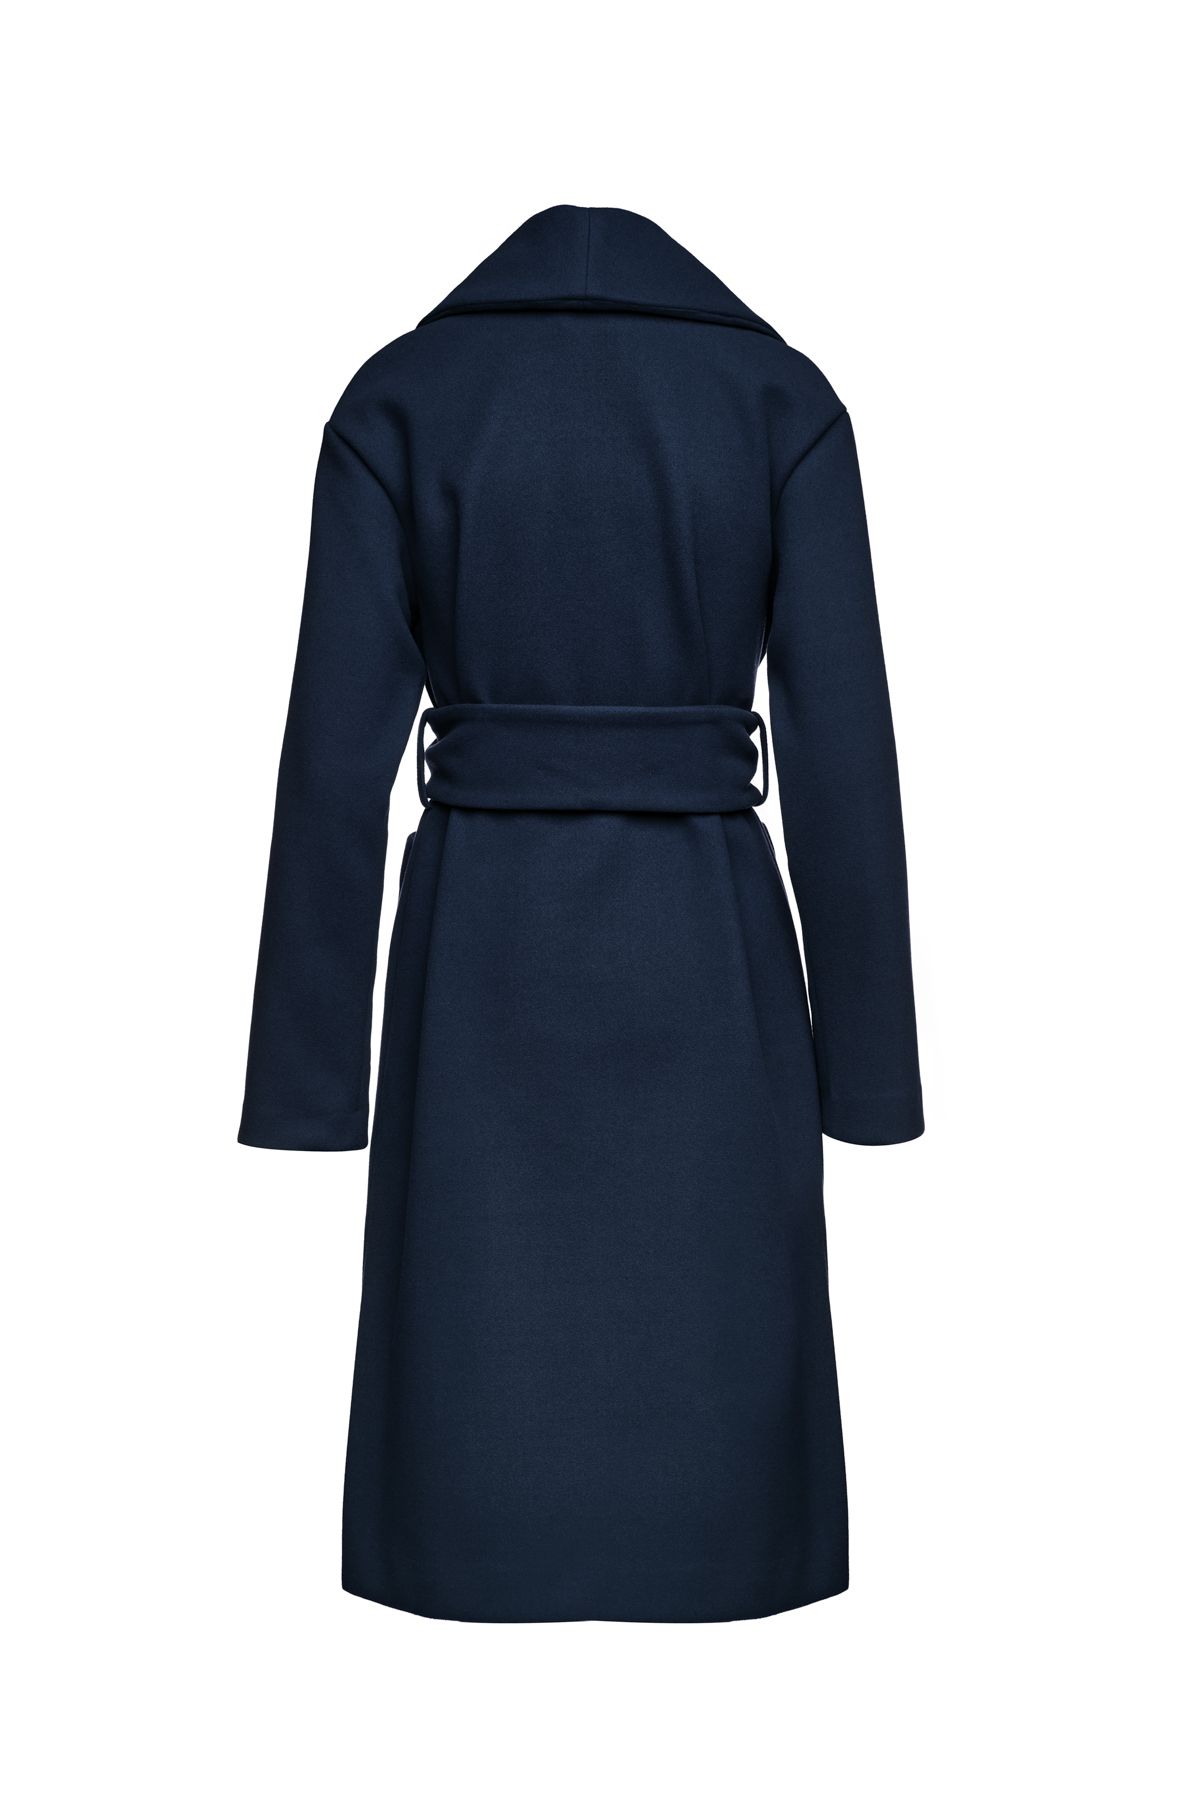 This long navy blue coat is crafted in mouflon style fabric. There are large square patch pockets on either side. It has a large lapel and drop shoulders. The coat fastens in the front with 2 large black plastic buttons. At the waist it has belt loops on the left and right so that it can be worn with the 9cm wide belt which is in the same fabric. The coat has big slits on either side. It is styled in a straight silhouette. This piece is ideal for wear in the day or for an evening out.